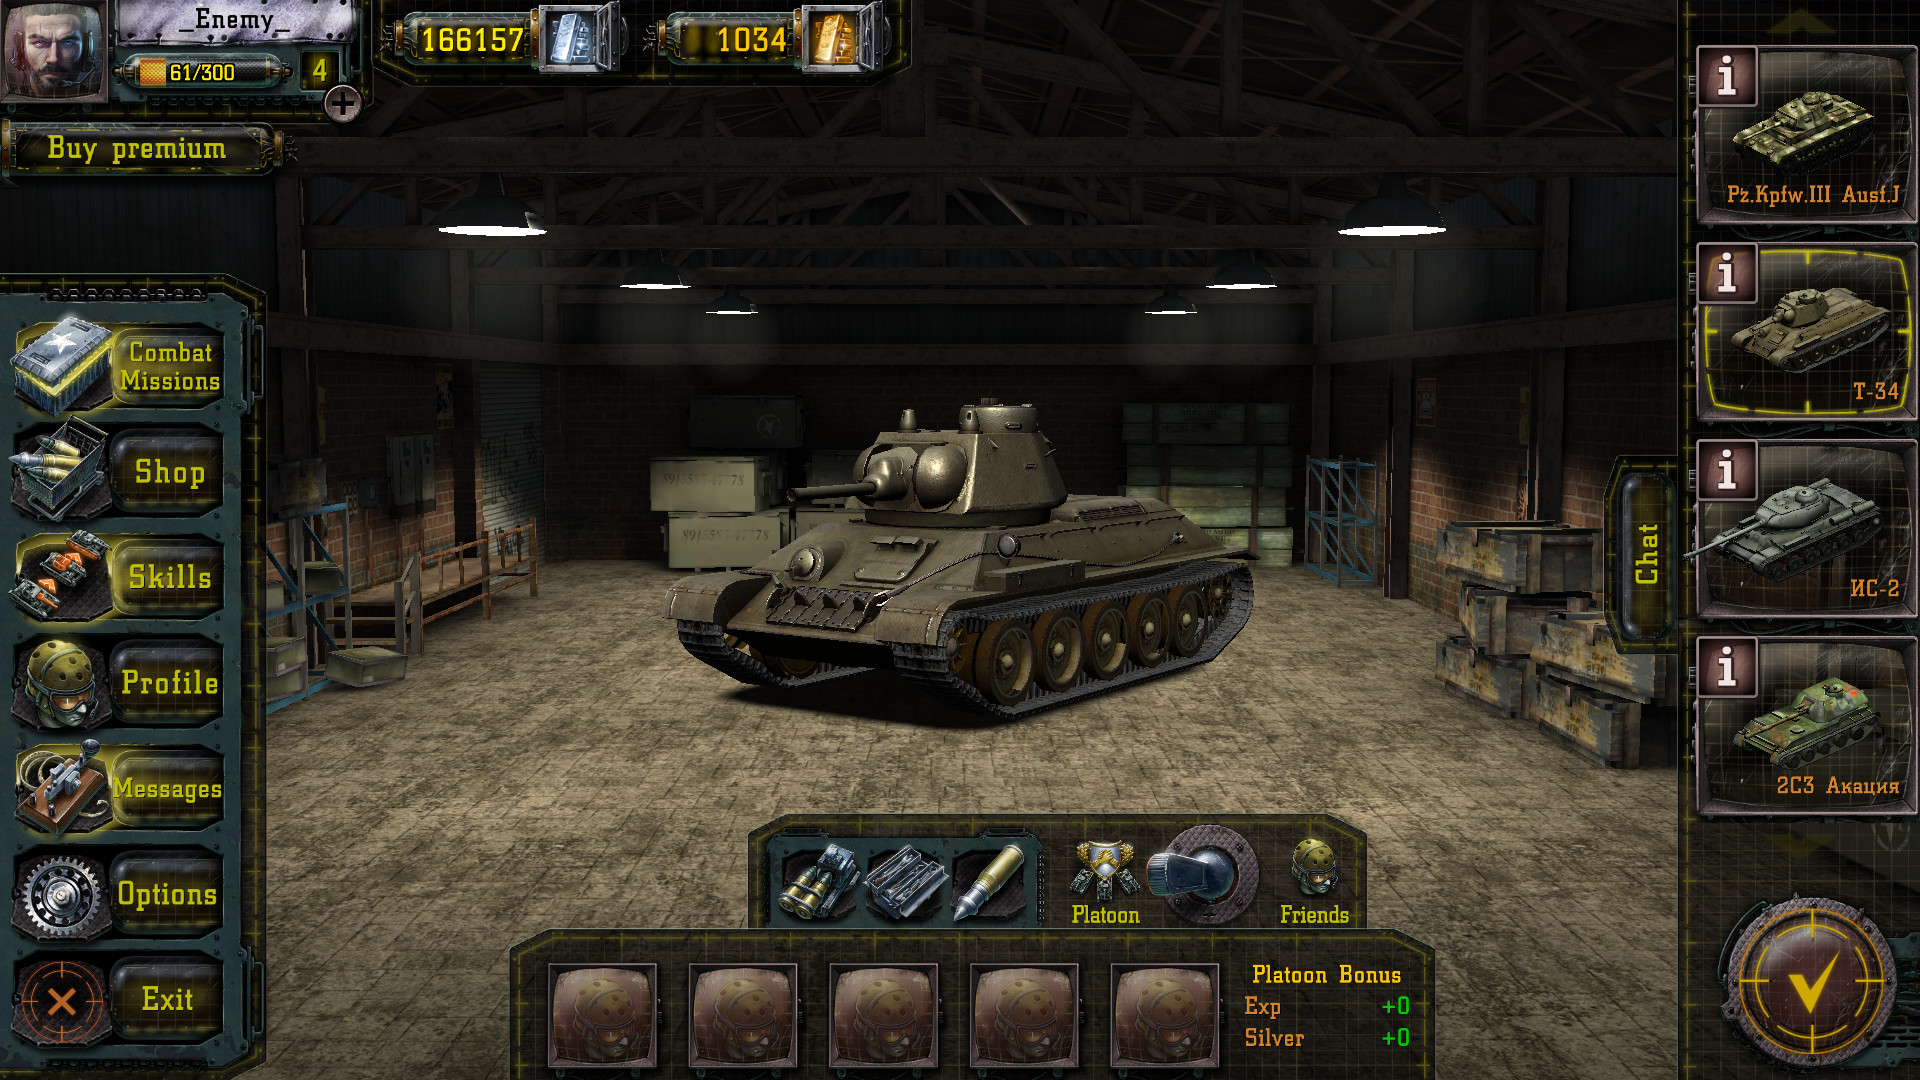 instal the last version for iphoneFind & Destroy: Tank Strategy